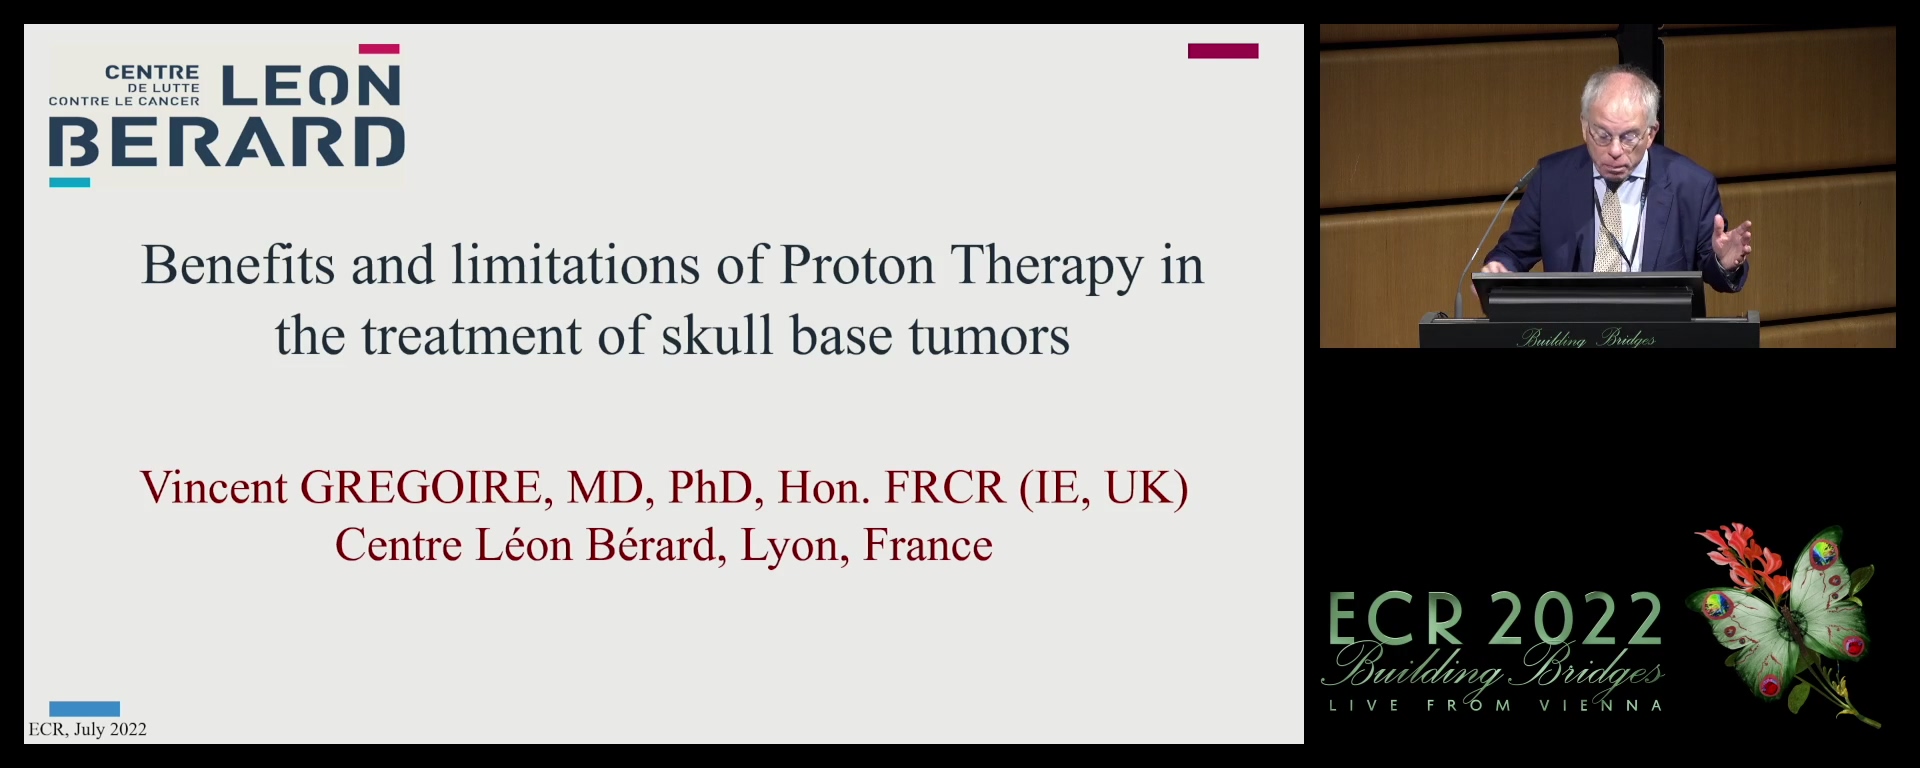 Benefits and limitations of proton therapy in the treatment of skull base tumours